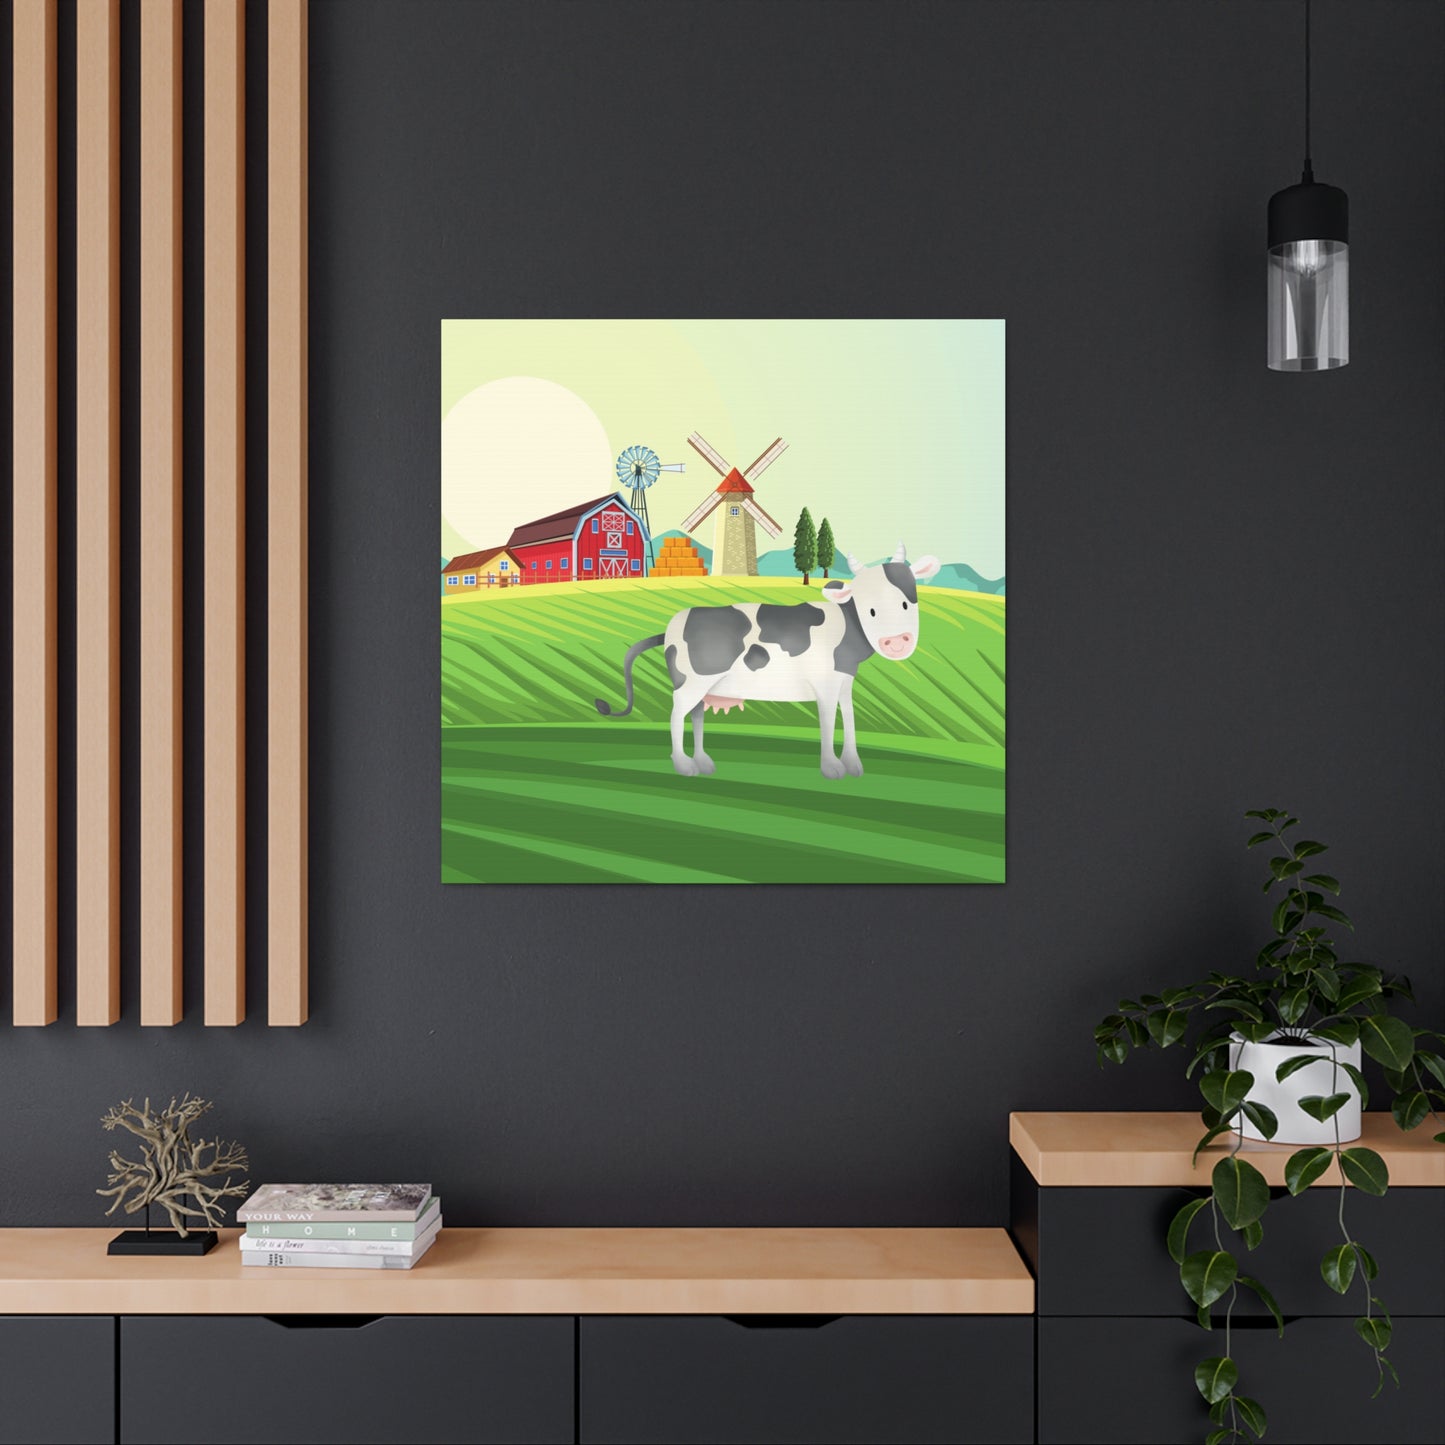 "Cow On A Farm" Kids Wall Art - Weave Got Gifts - Unique Gifts You Won’t Find Anywhere Else!